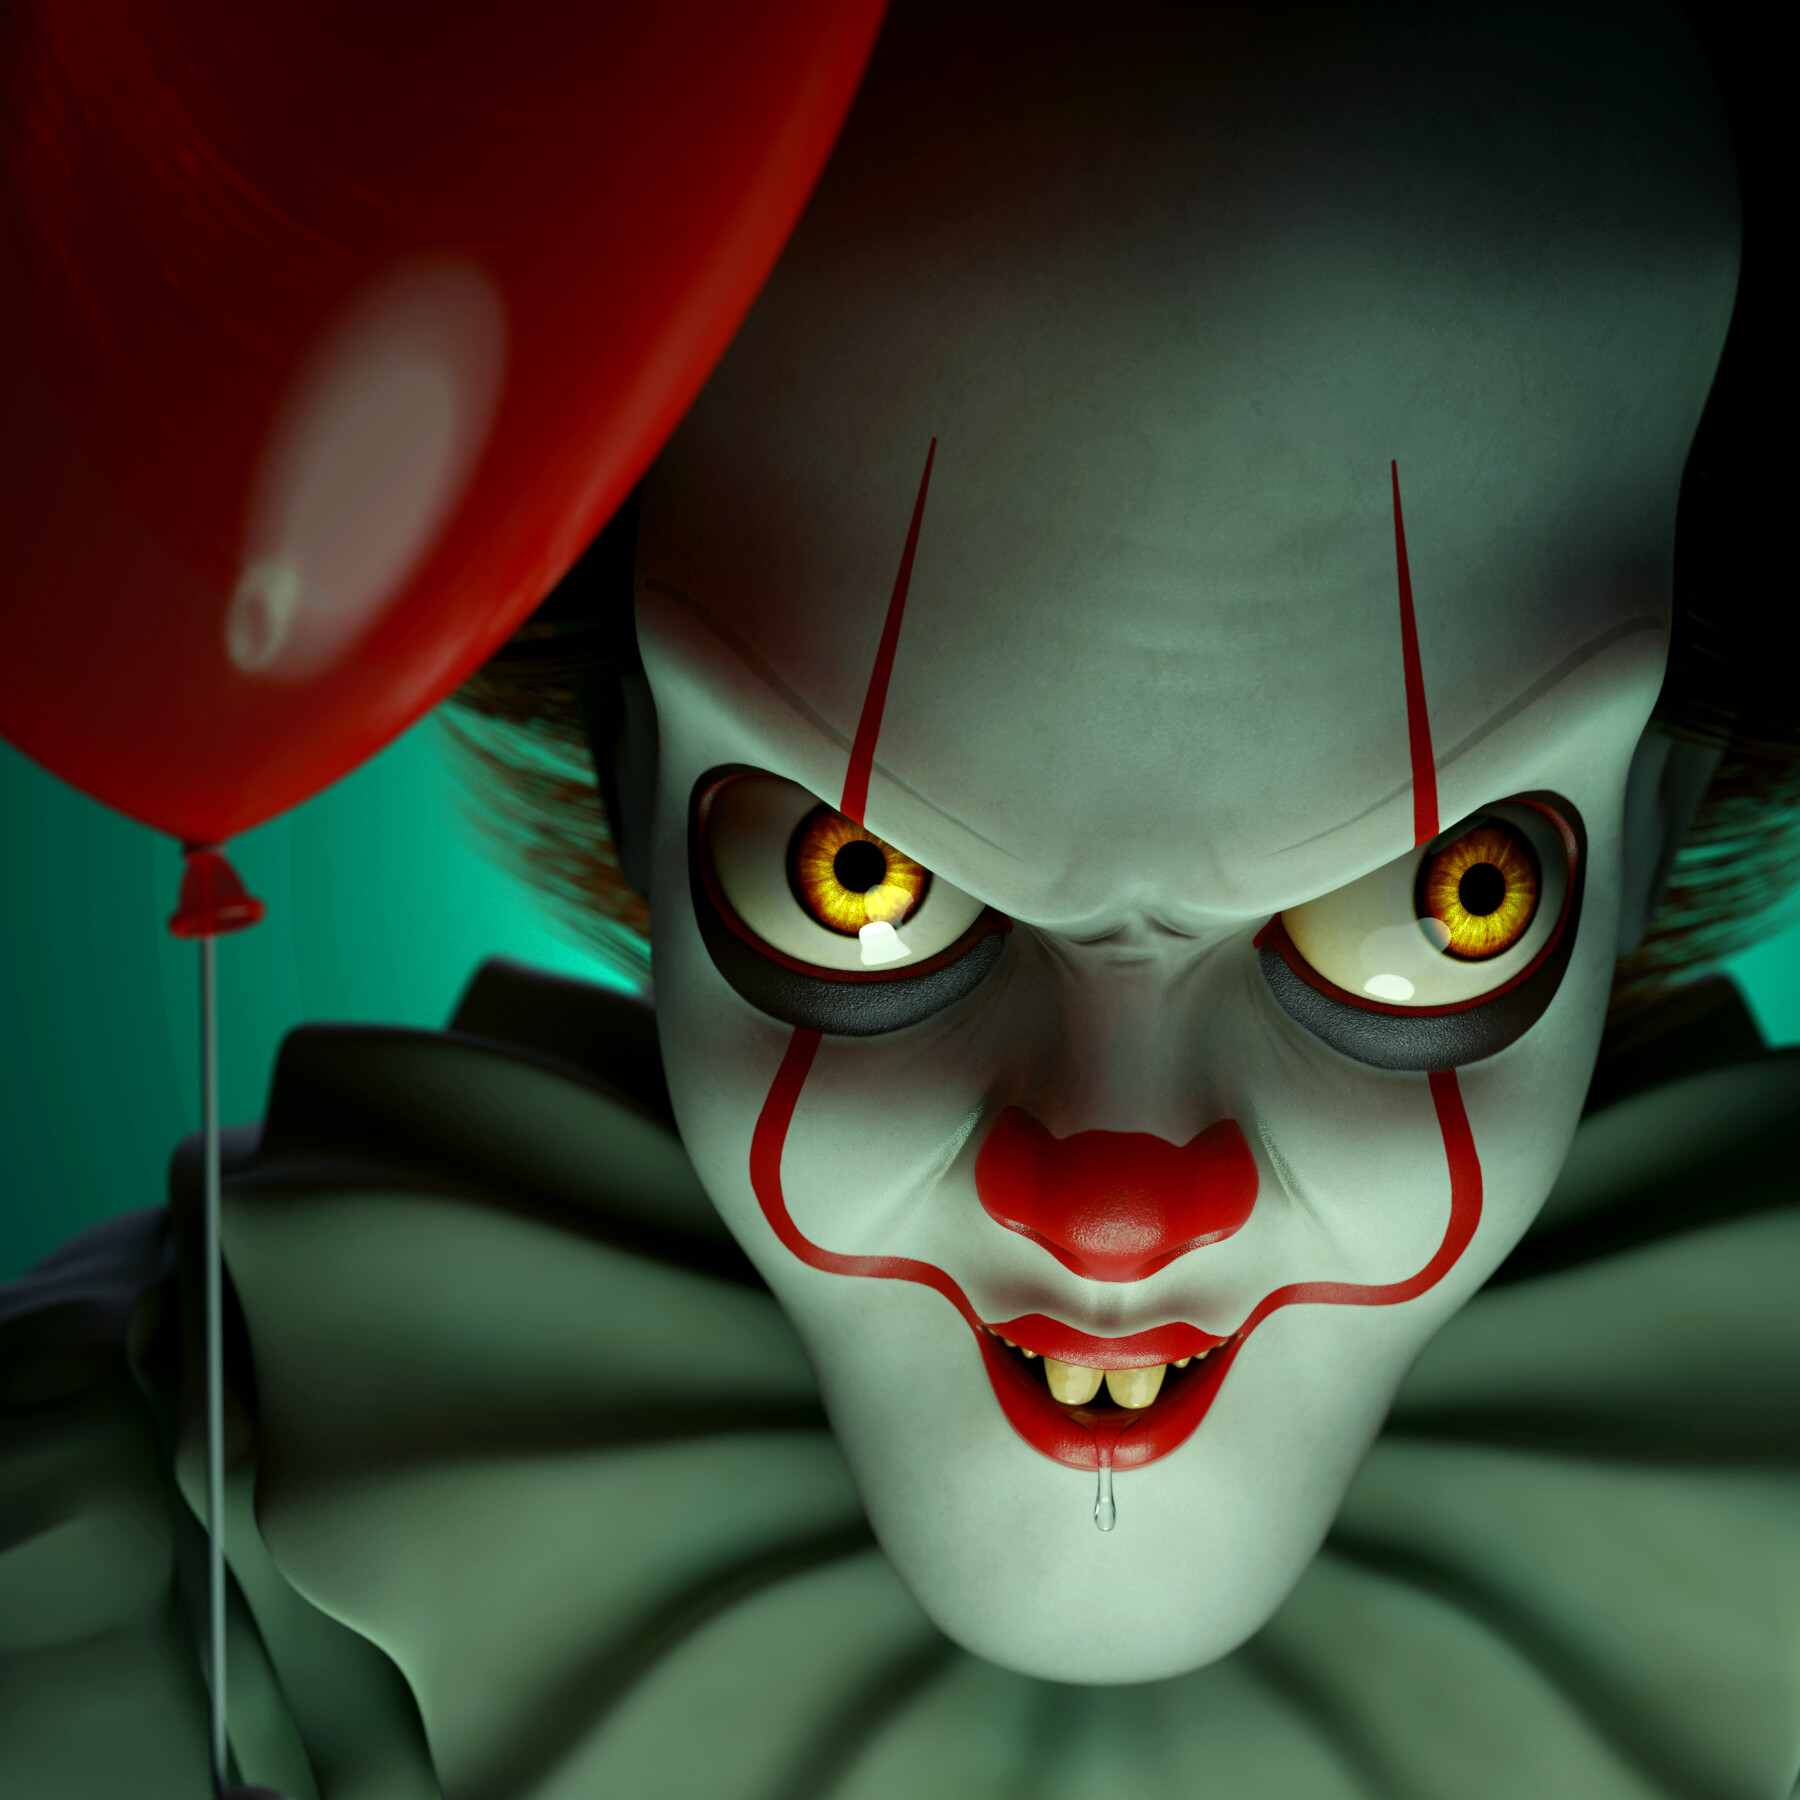 Pennywise, The Dancing Clown - IT.